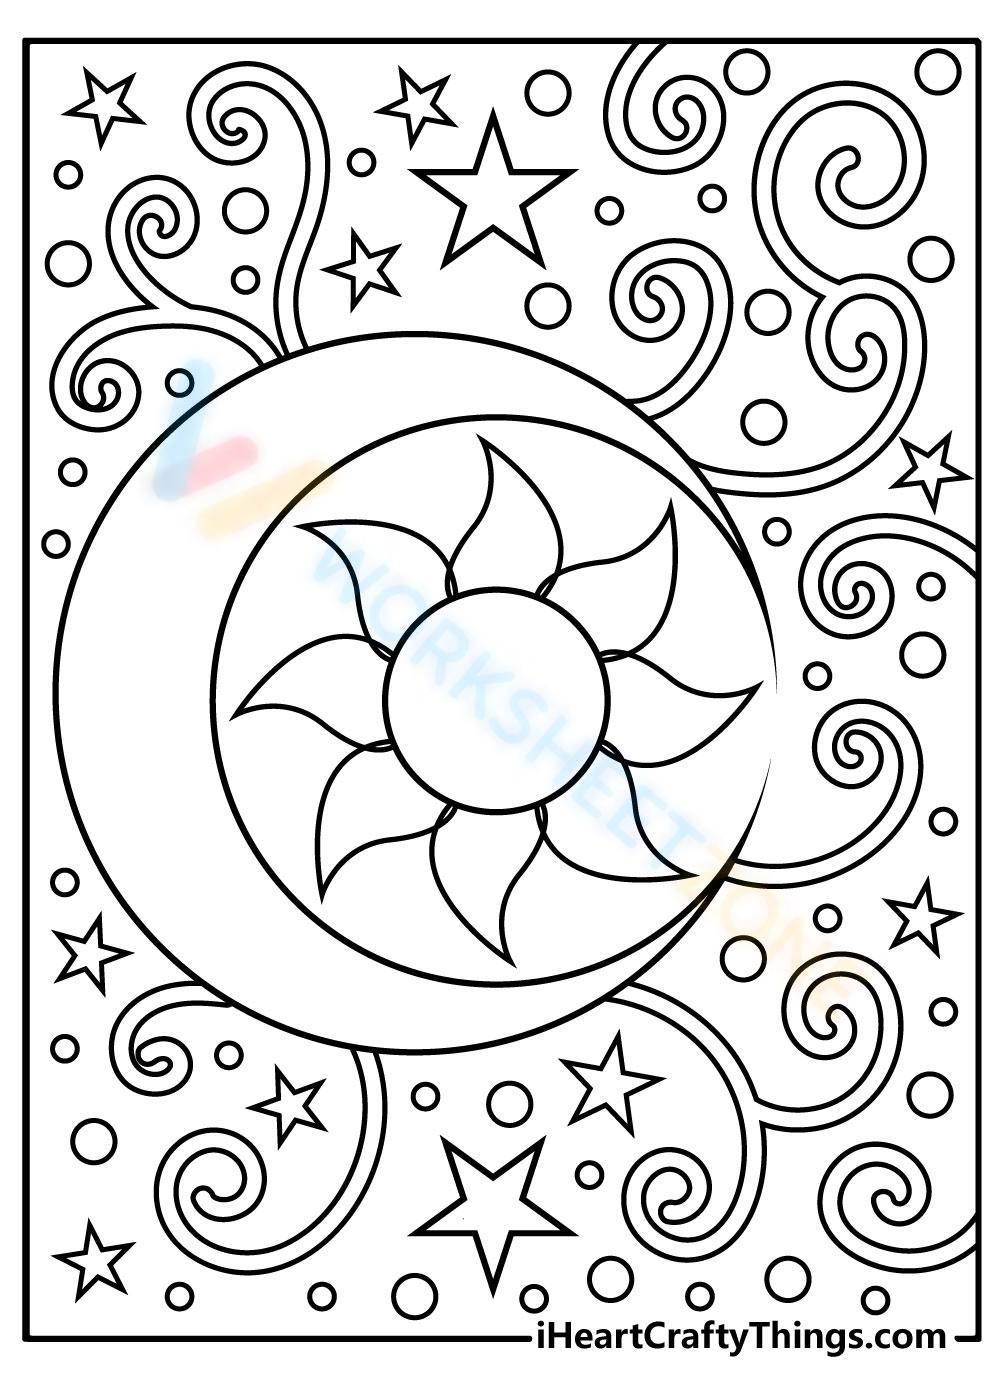 Grade trippy coloring pages worksheets